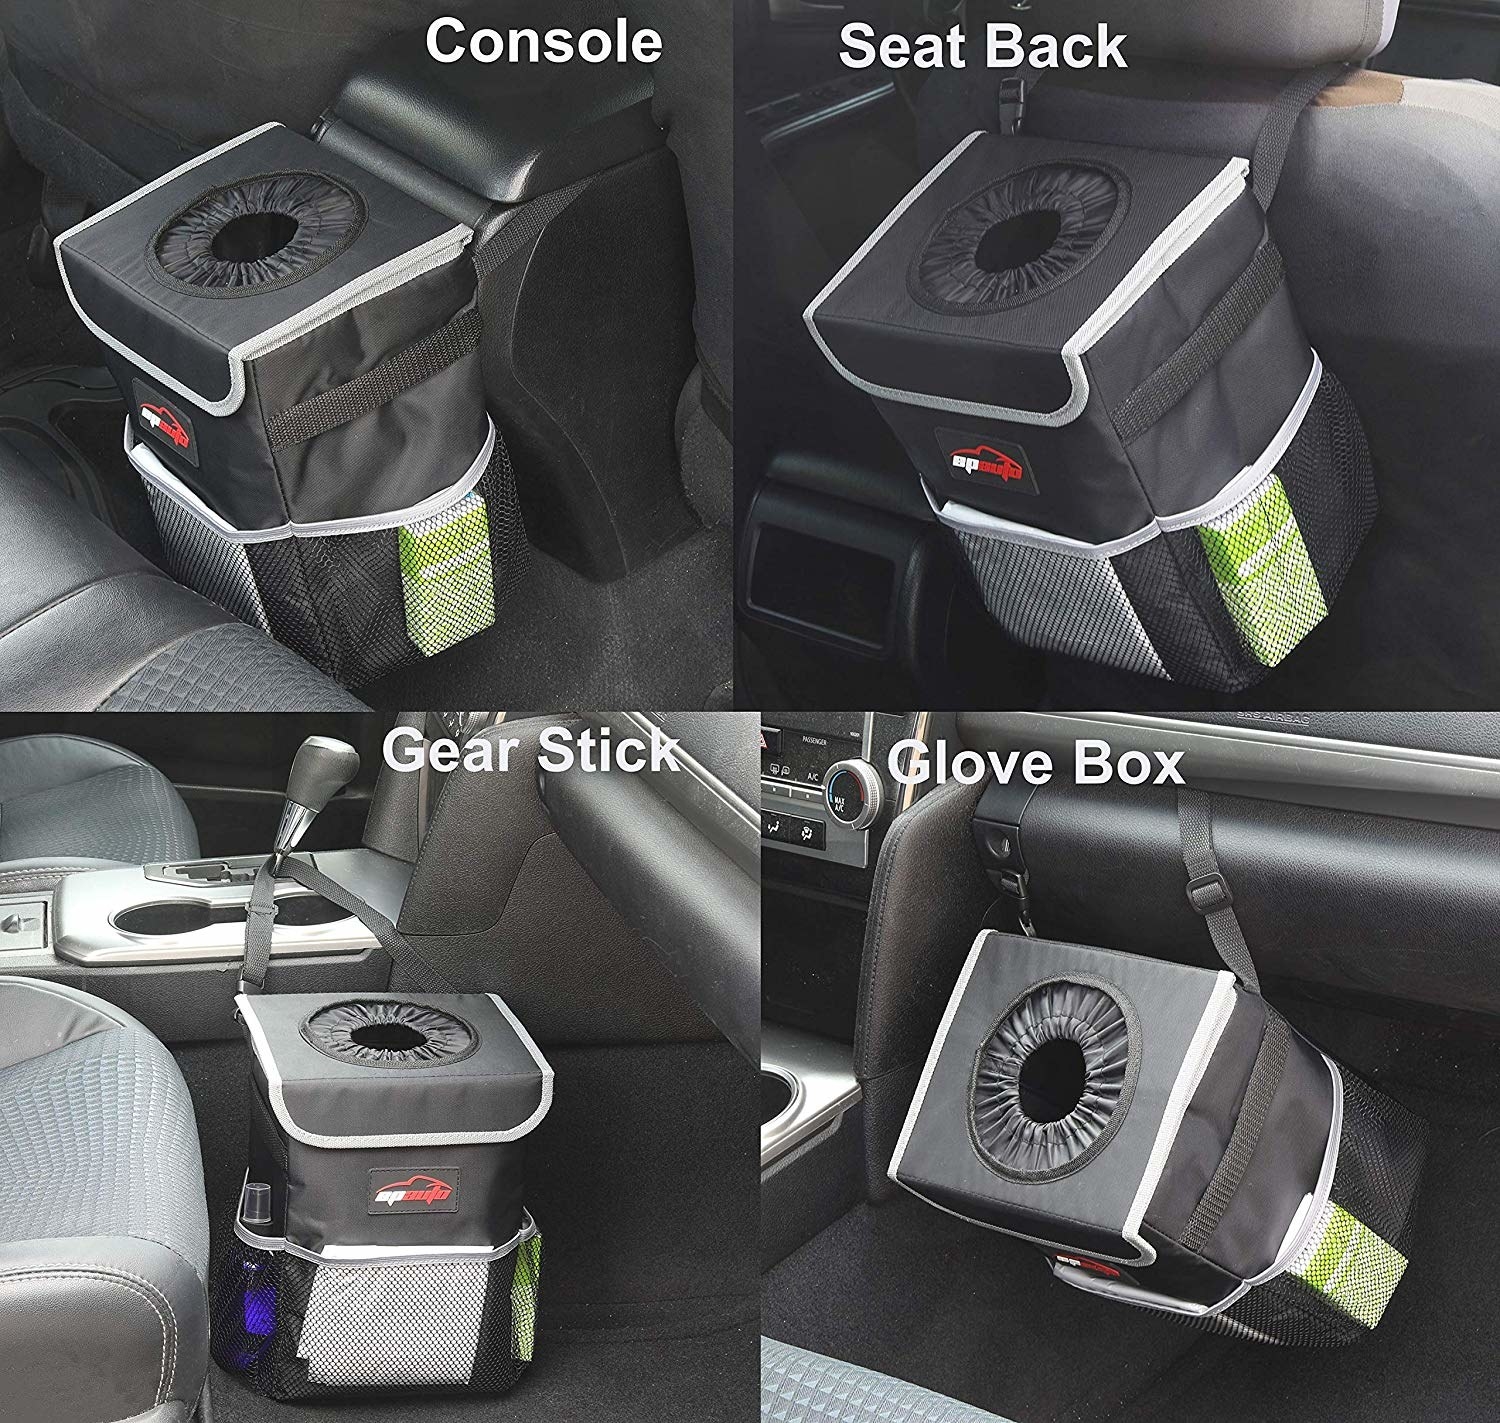 The trash can in different parts of the car including the back of the console, behind a seat back, around the gear stick, and attached to the glove box